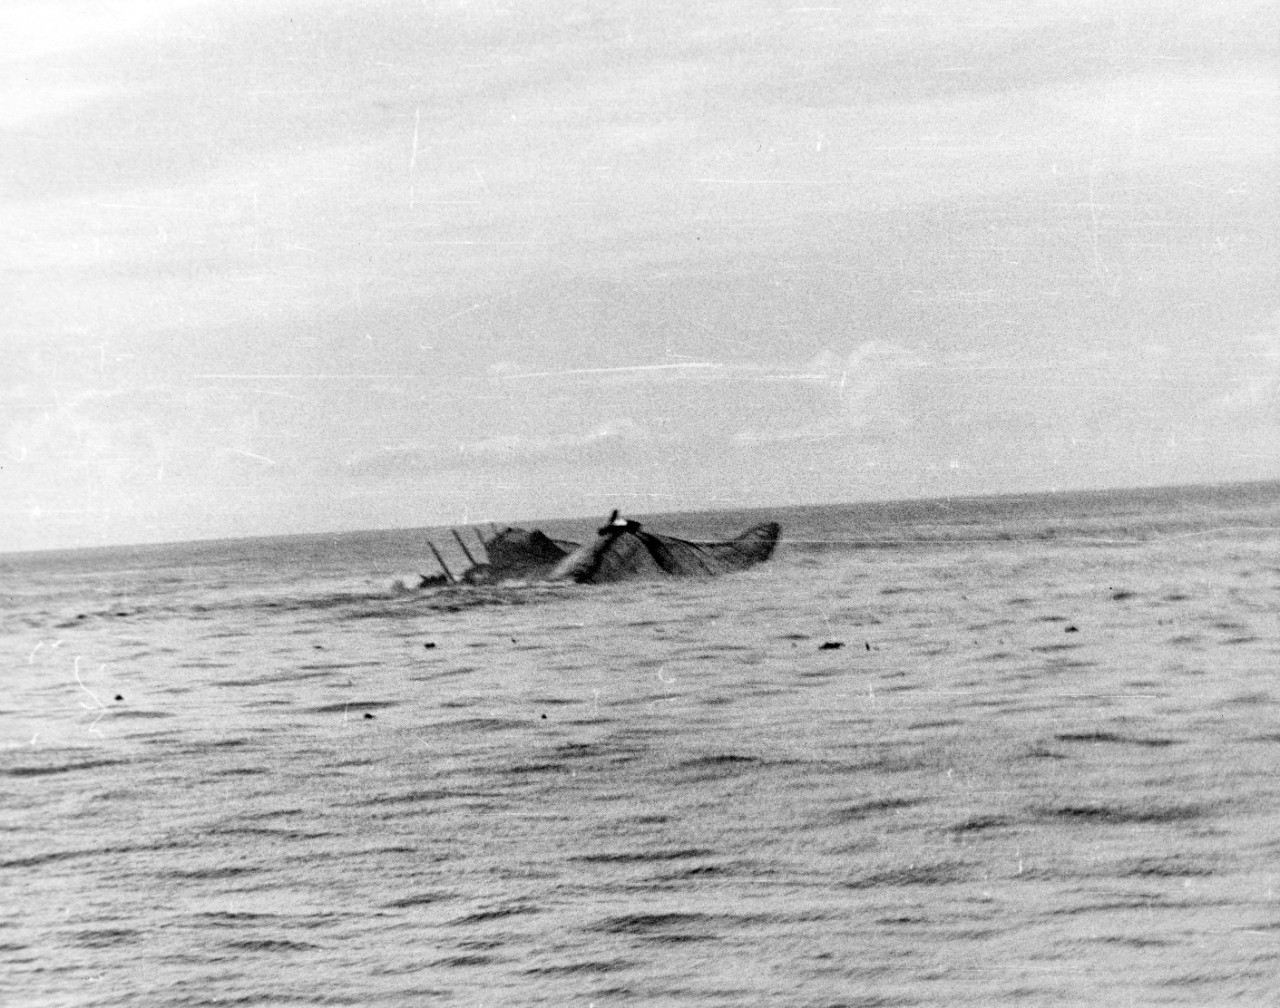 Photo #: NH 106000  Battle of Midway, June 1942